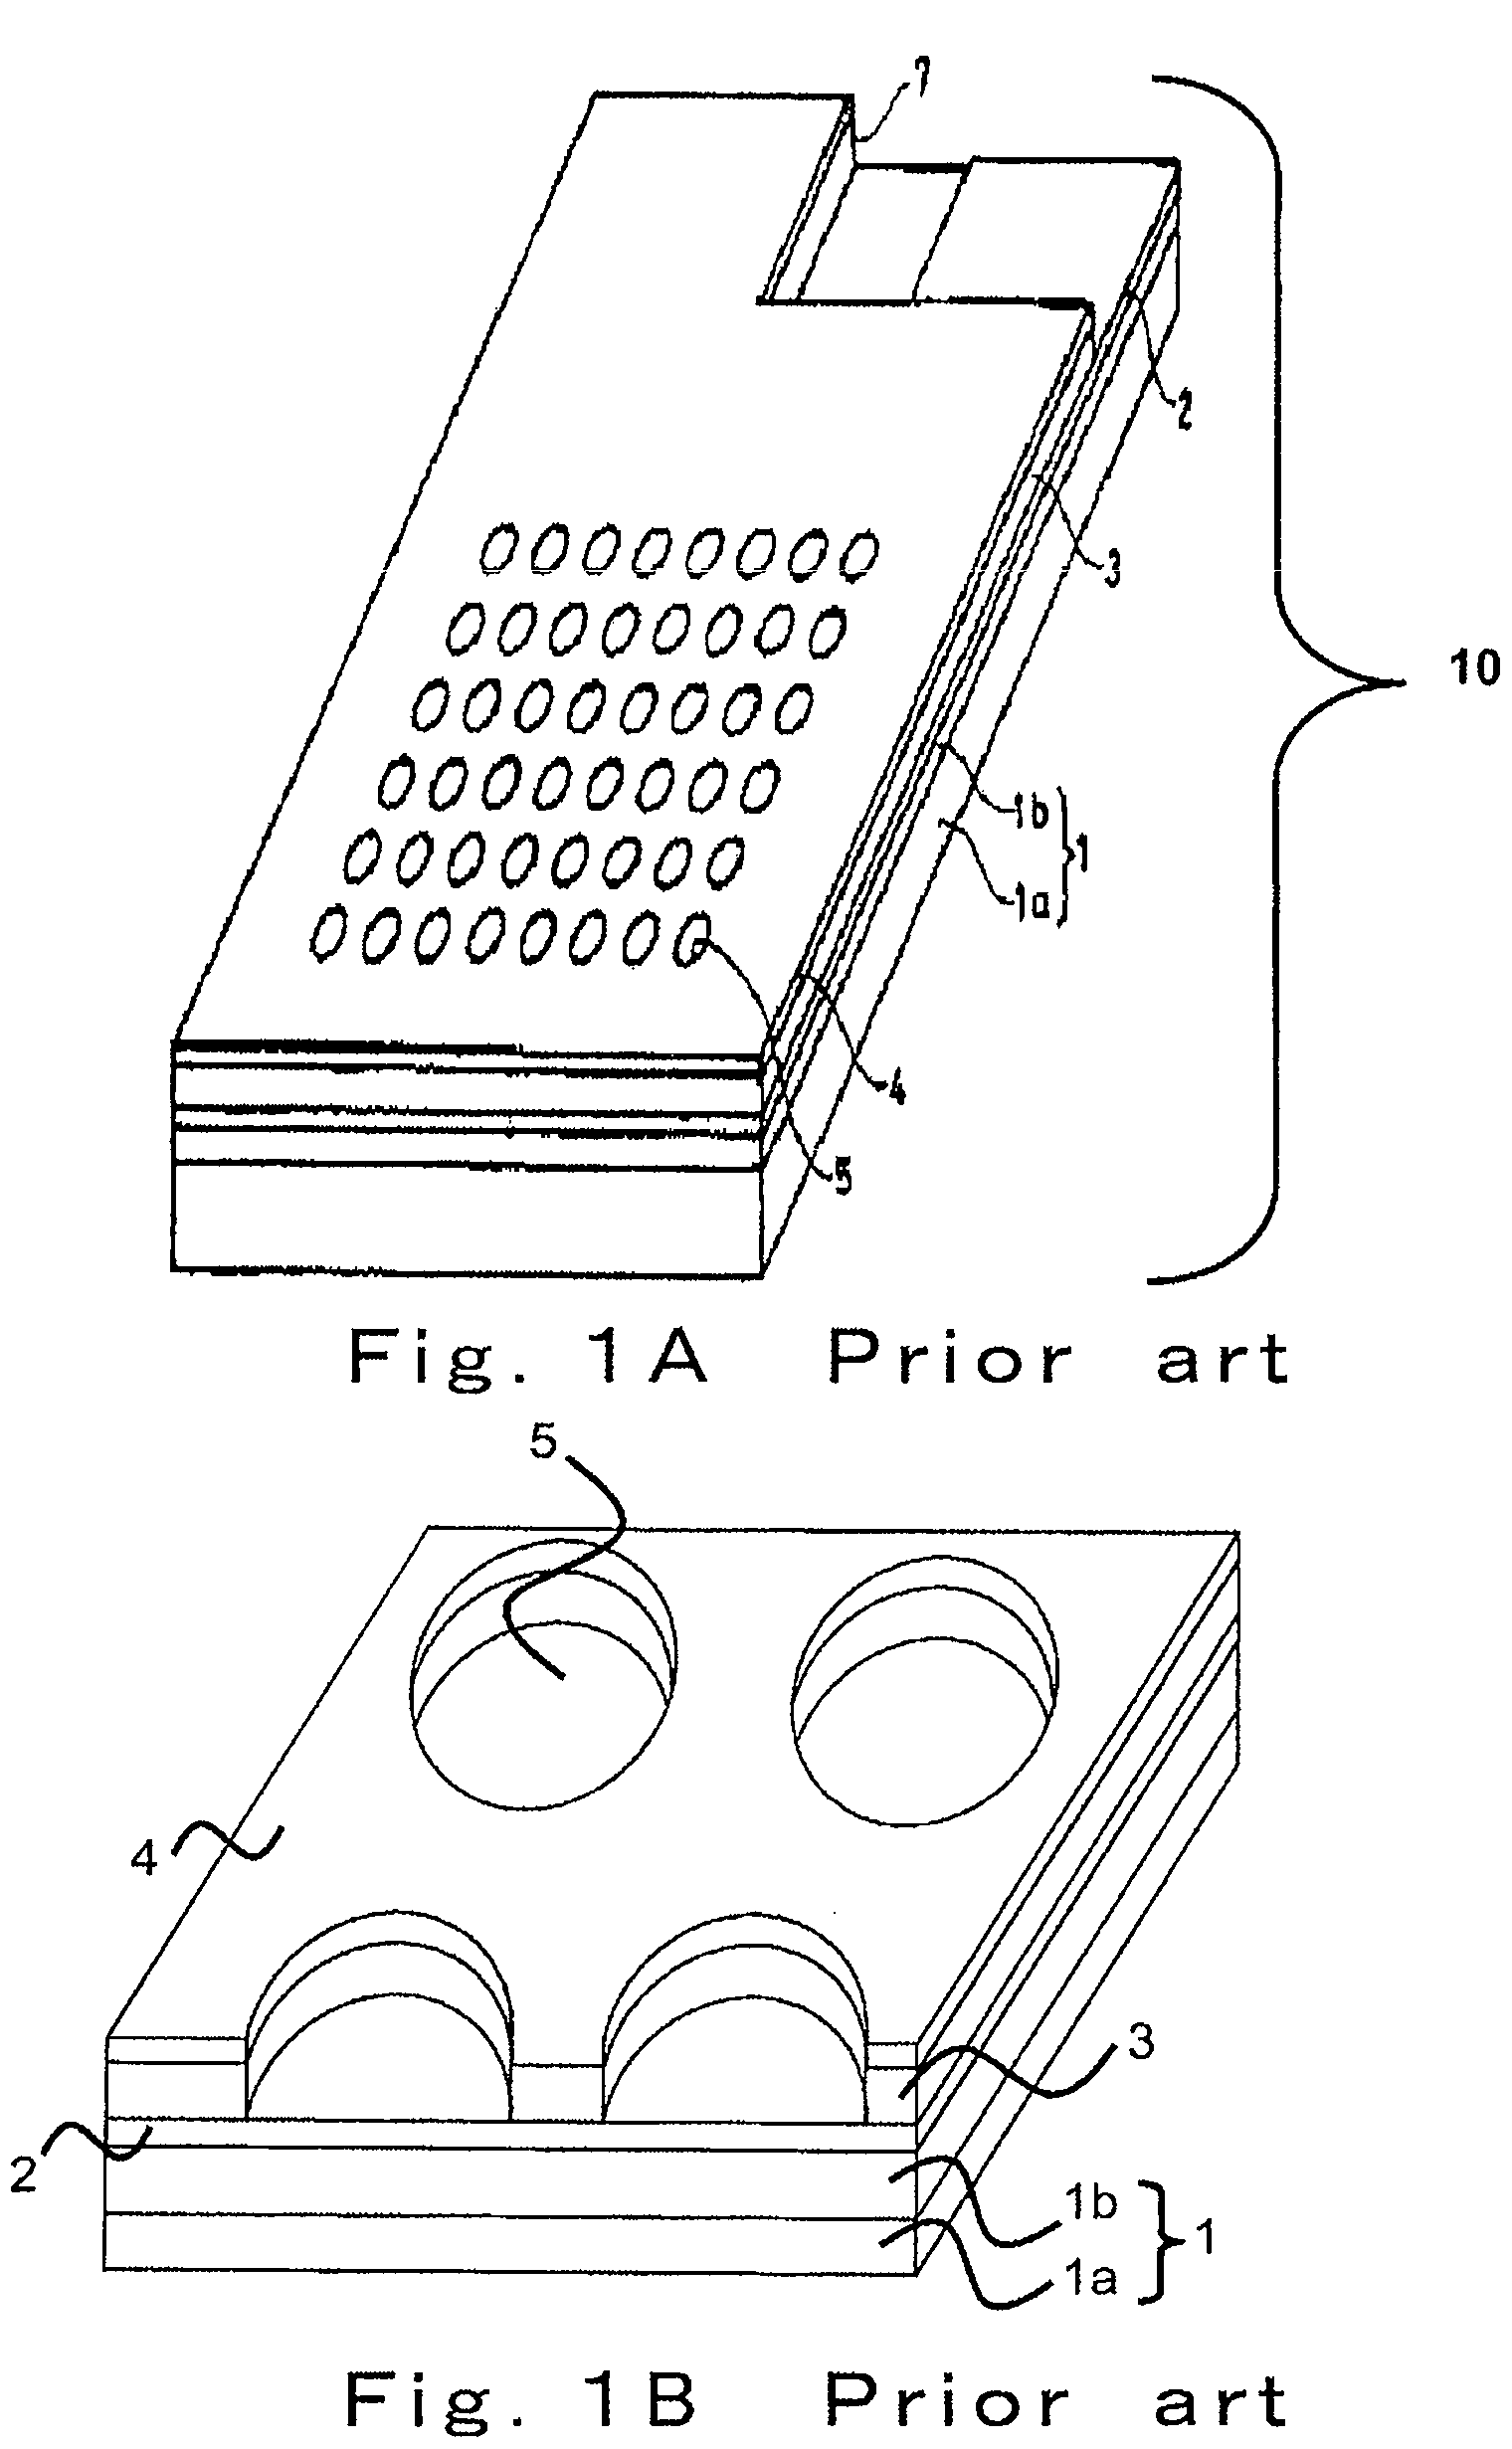 Electrode plate for electrochemical measurements